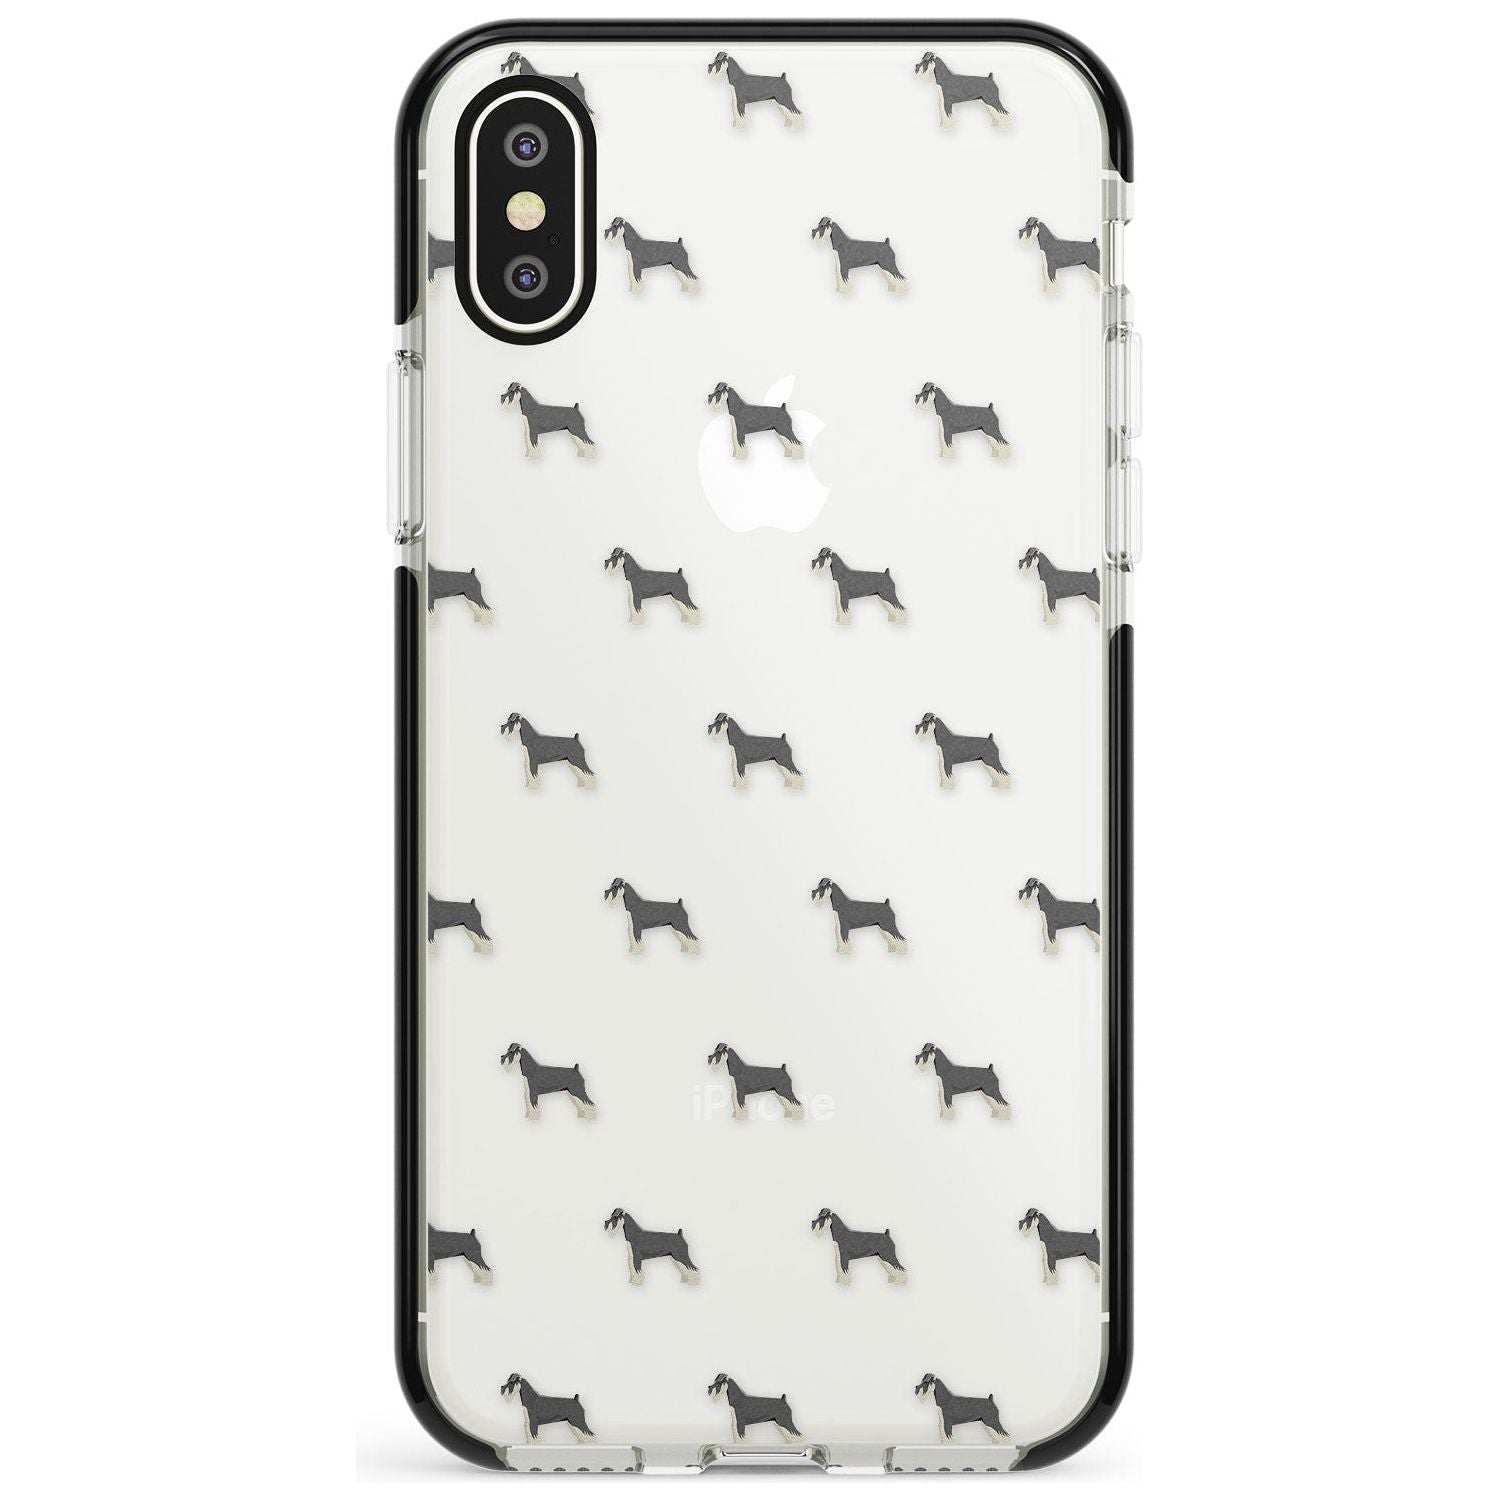 Schnauzer Dog Pattern Clear Black Impact Phone Case for iPhone X XS Max XR